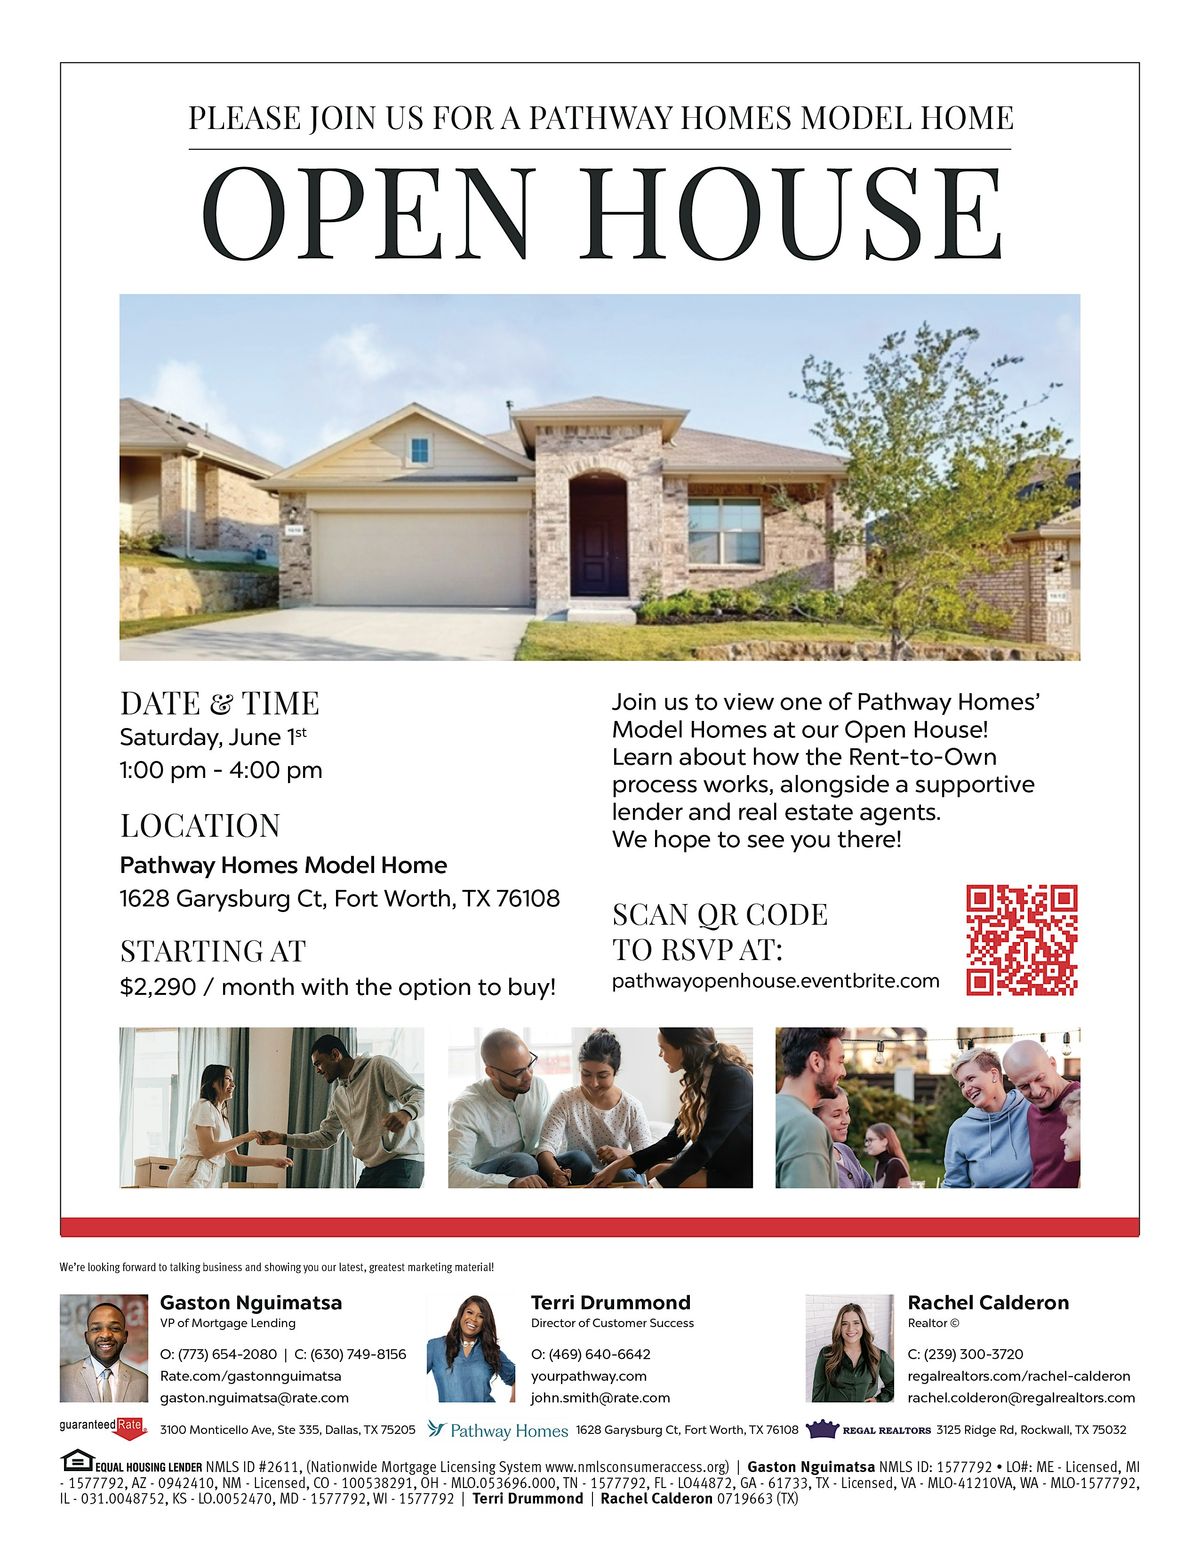 6\/1 Pathway Homes Model Home Open House and Q&A with Guaranteed Rate